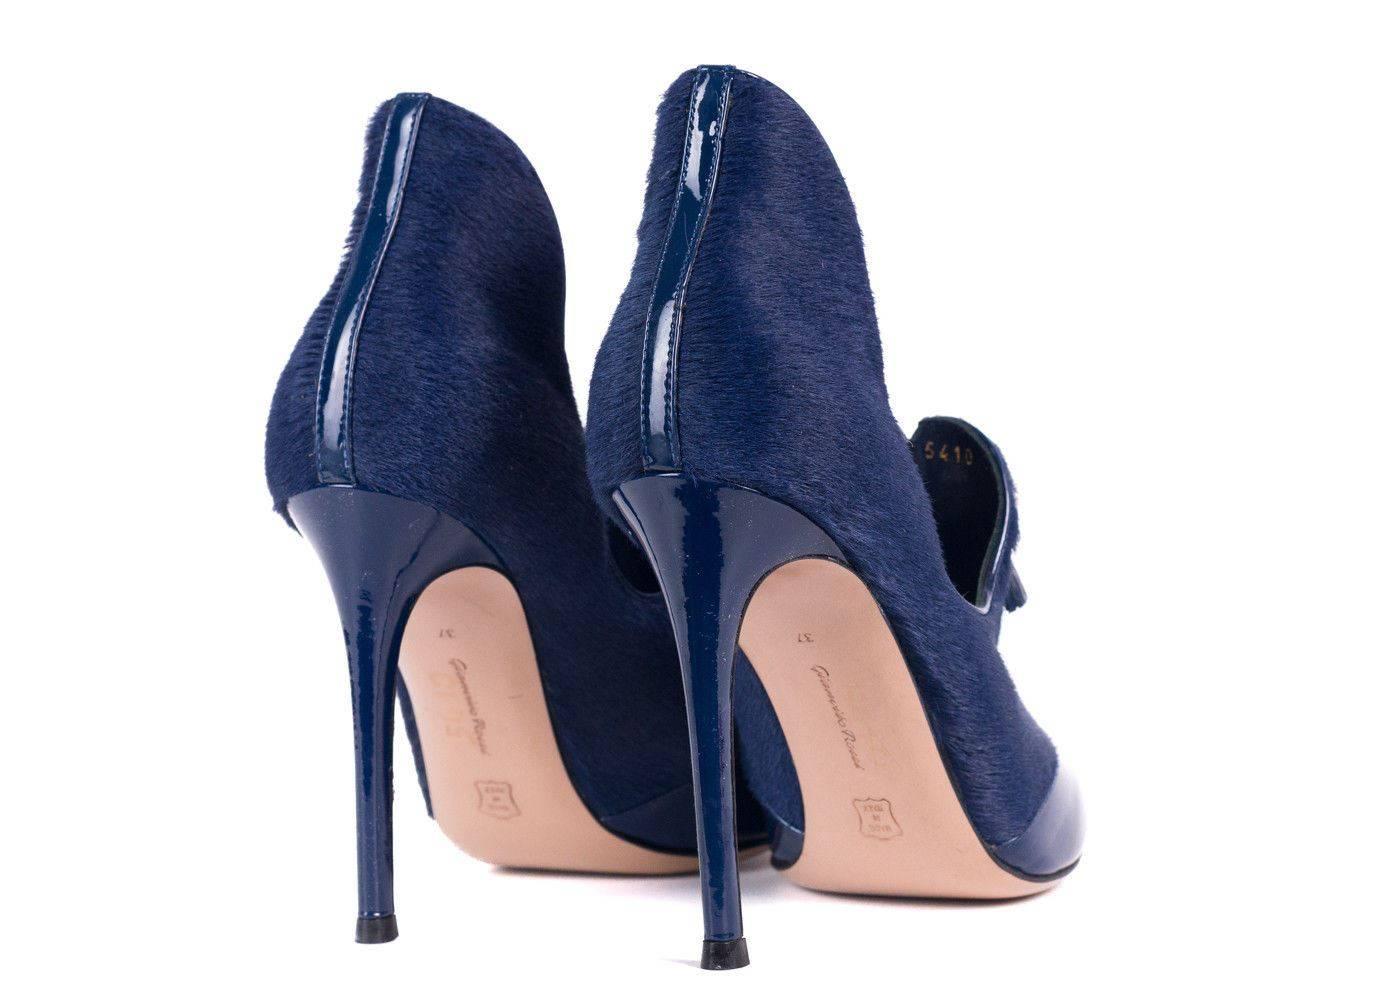 Gianvito Rossi Blue Patent Insert Pony Hair Peep Toe Bootie In New Condition For Sale In Brooklyn, NY